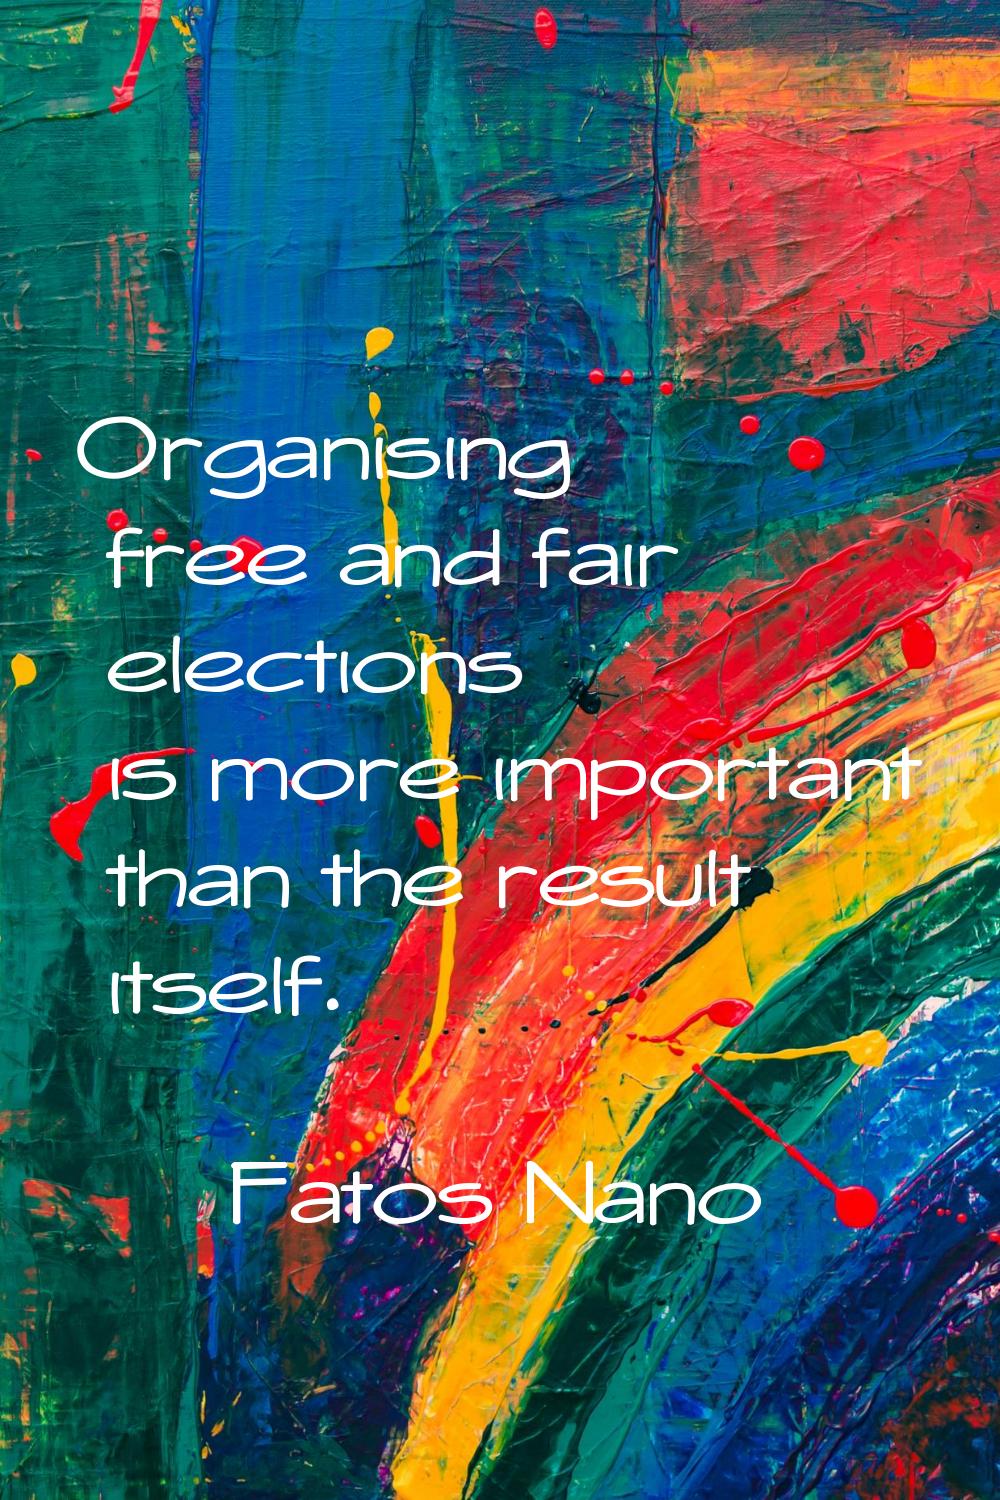 Organising free and fair elections is more important than the result itself.